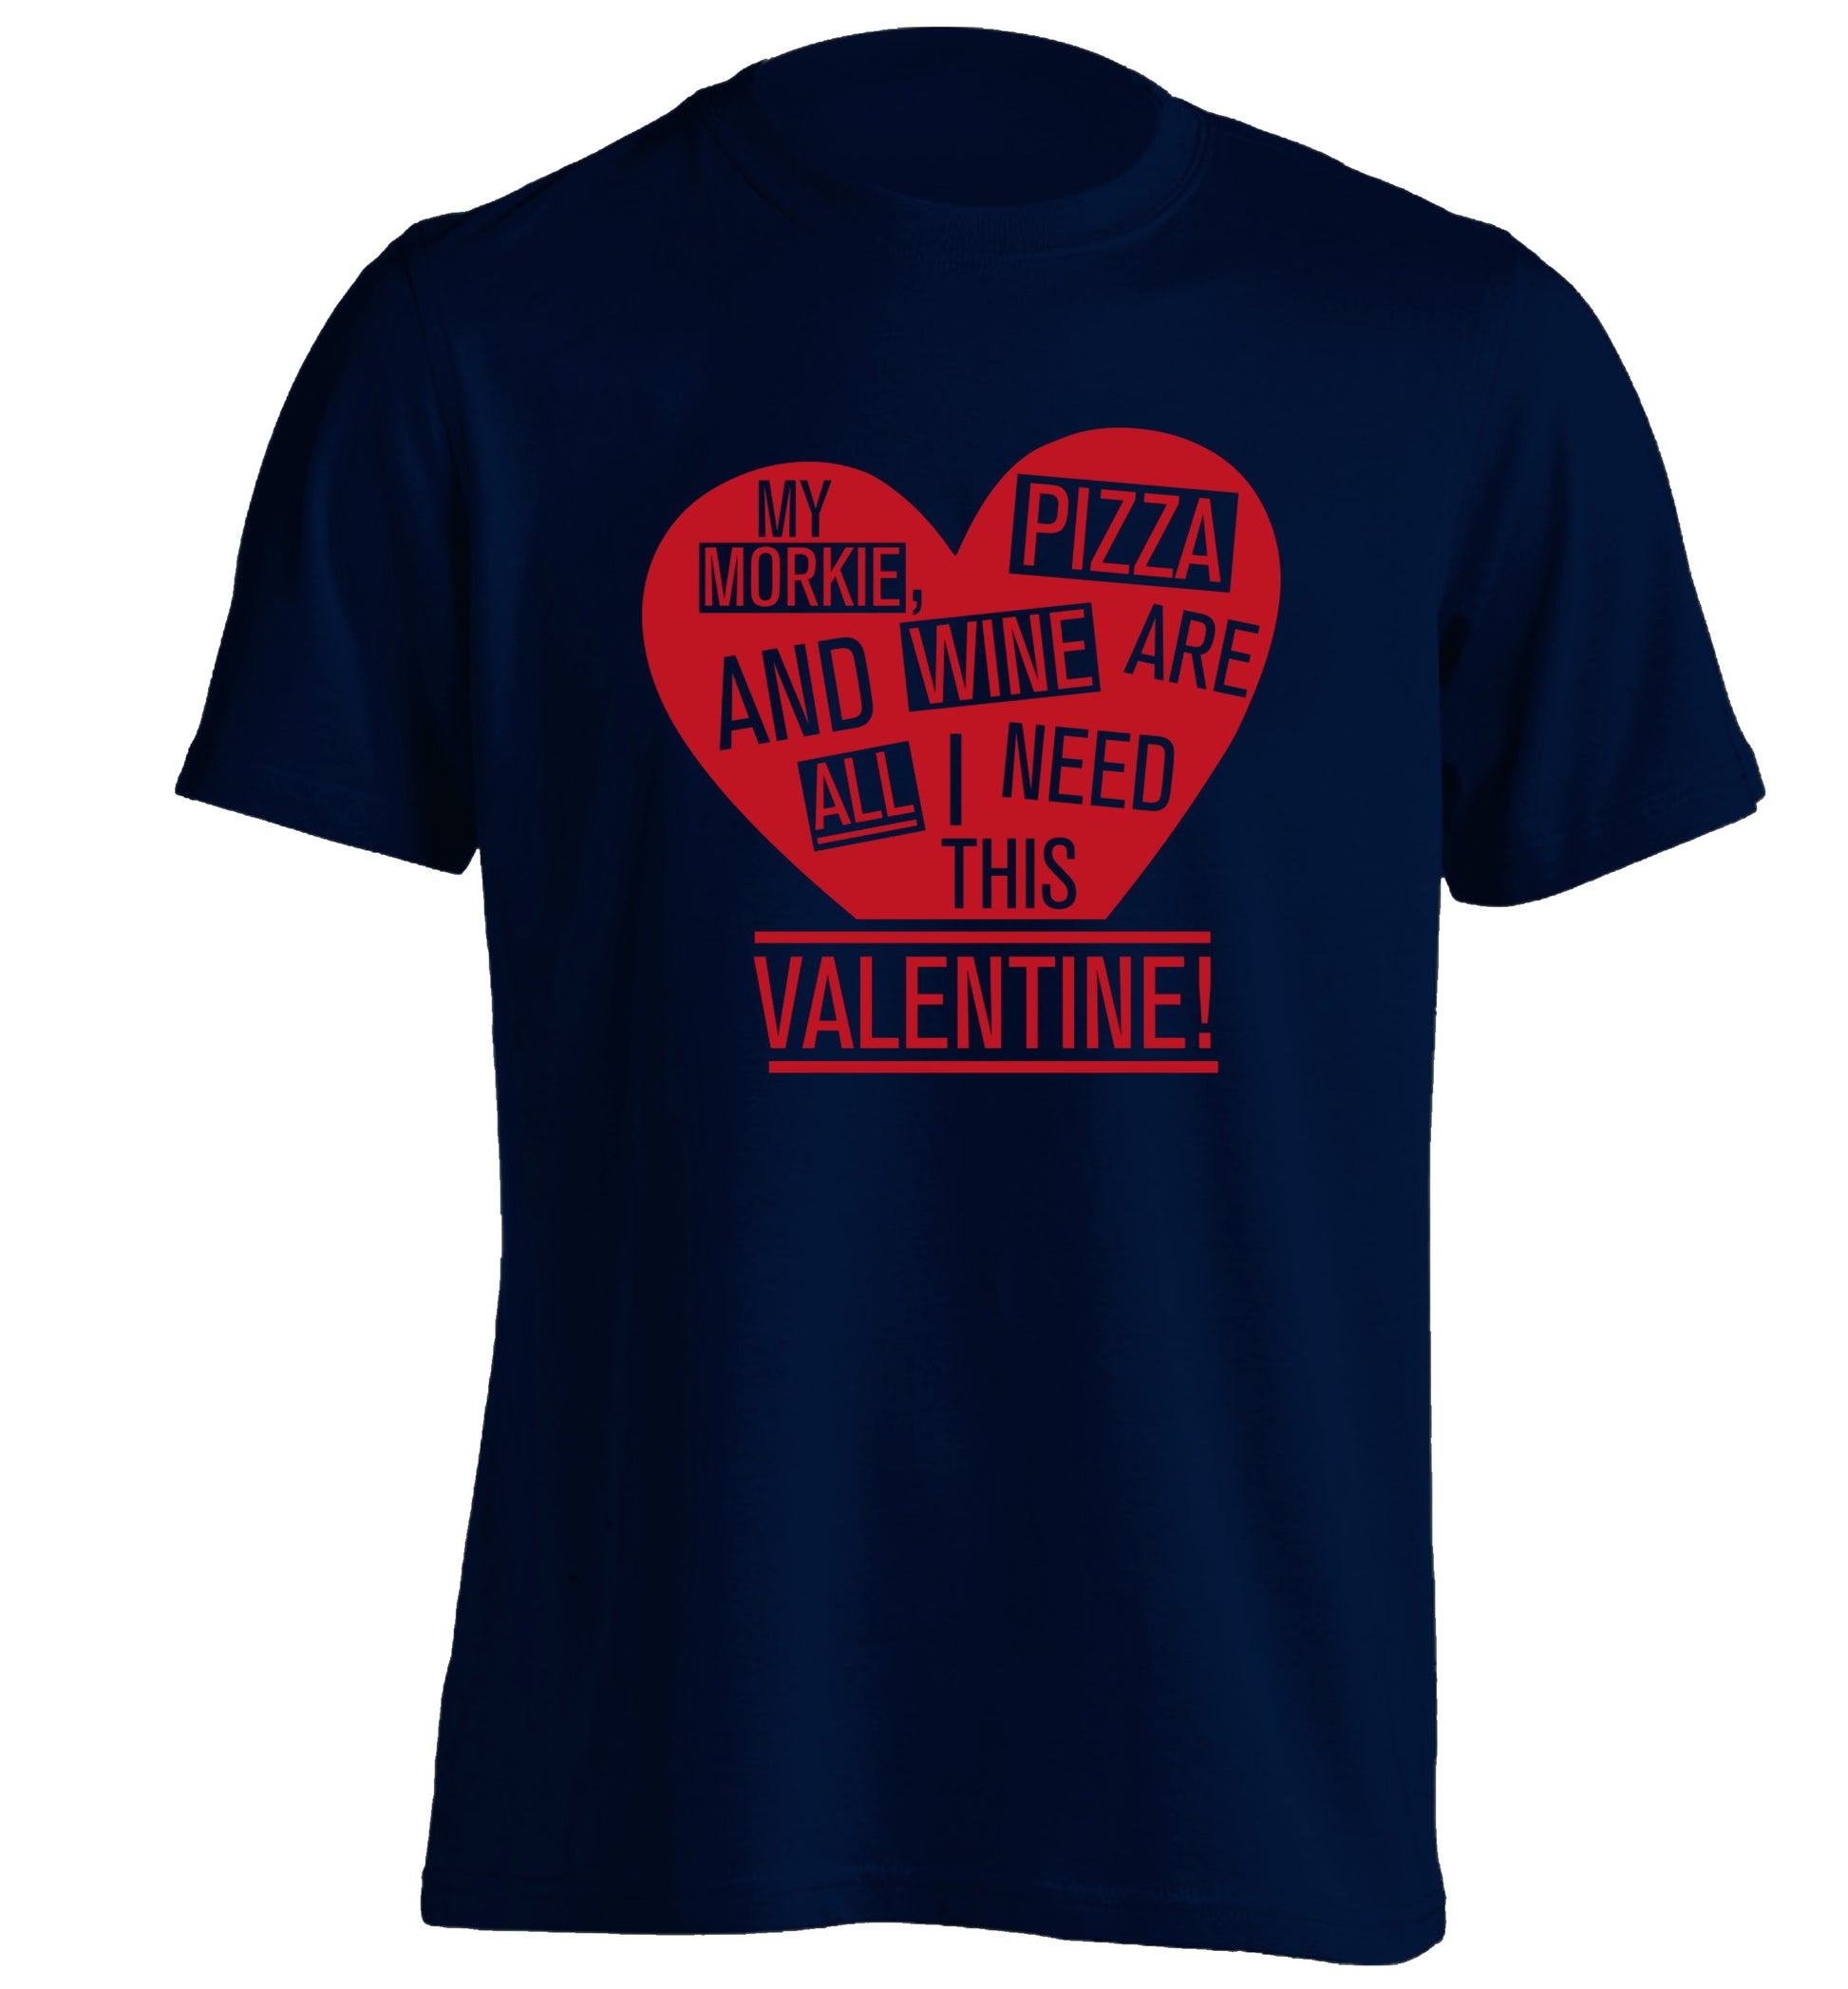 My morkie, pizza and wine are all I need this valentine! adults unisex navy Tshirt 2XL